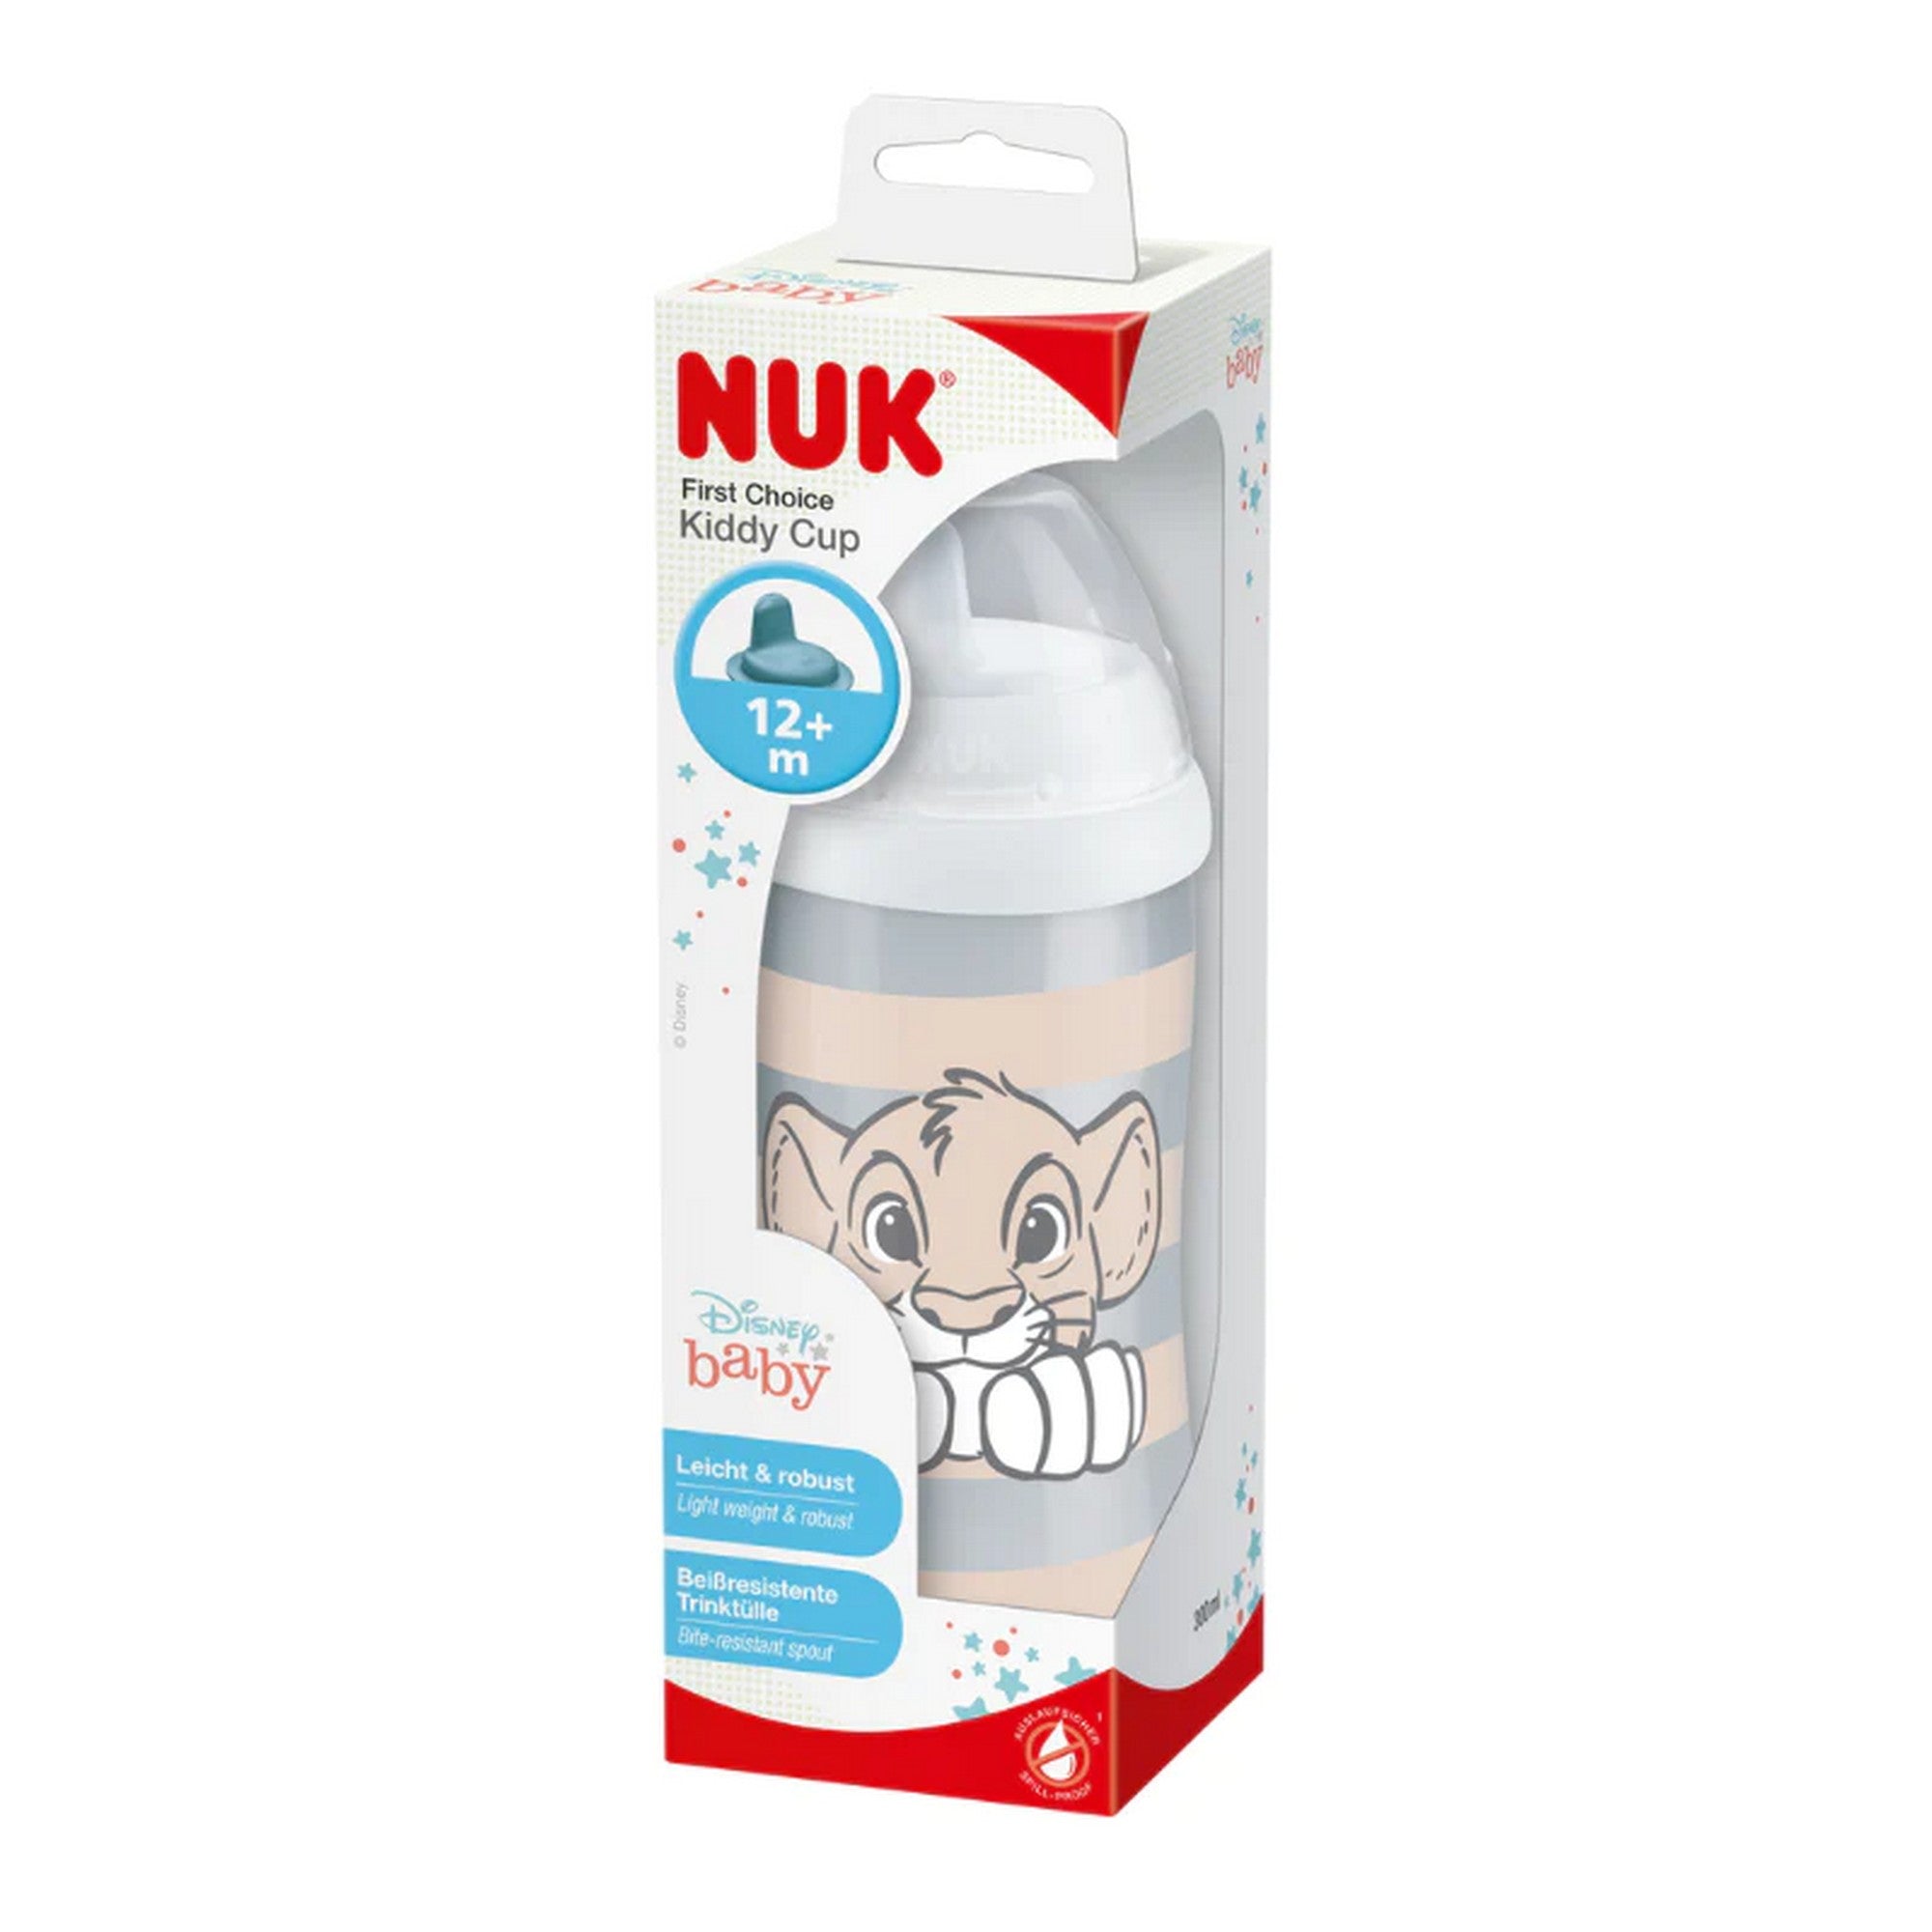 NUK FIRST CHOICE LION KING SILICONE 12+ MONTHS KIDDY CUP 300ML